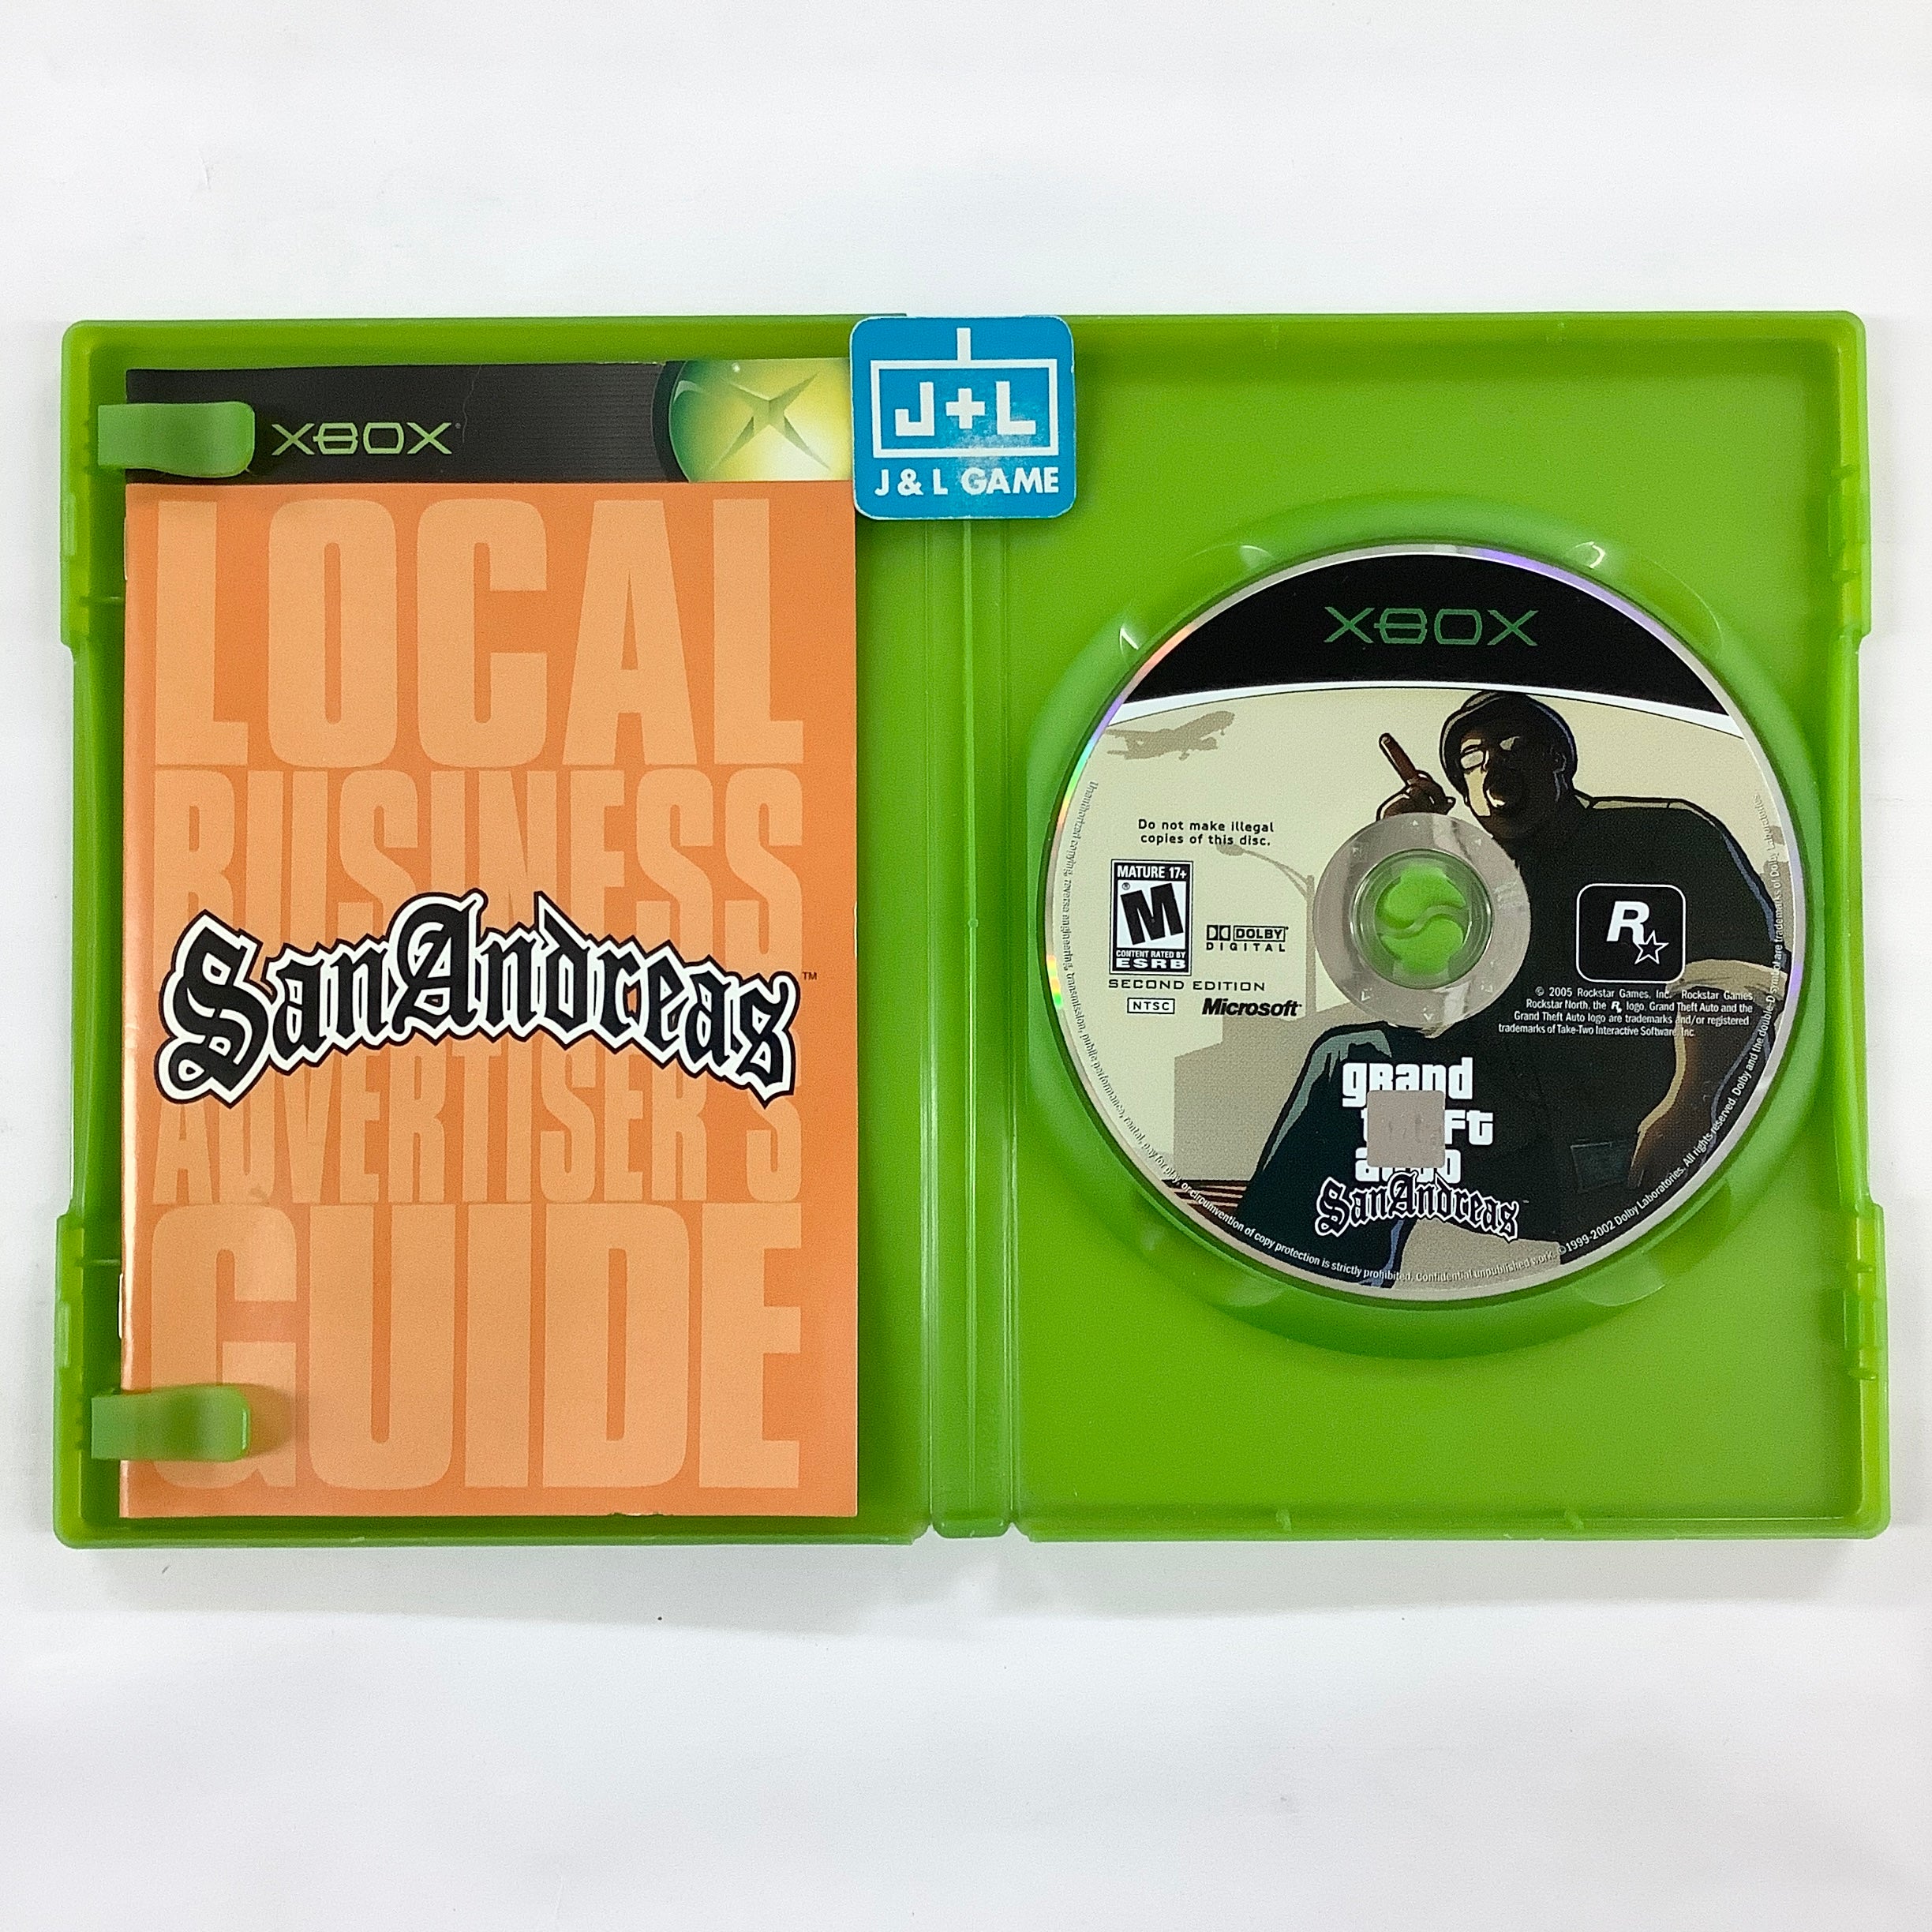 Grand Theft Auto: San Andreas (Second Edition) - (XB) Xbox [Pre-Owned] Video Games Rockstar Games   